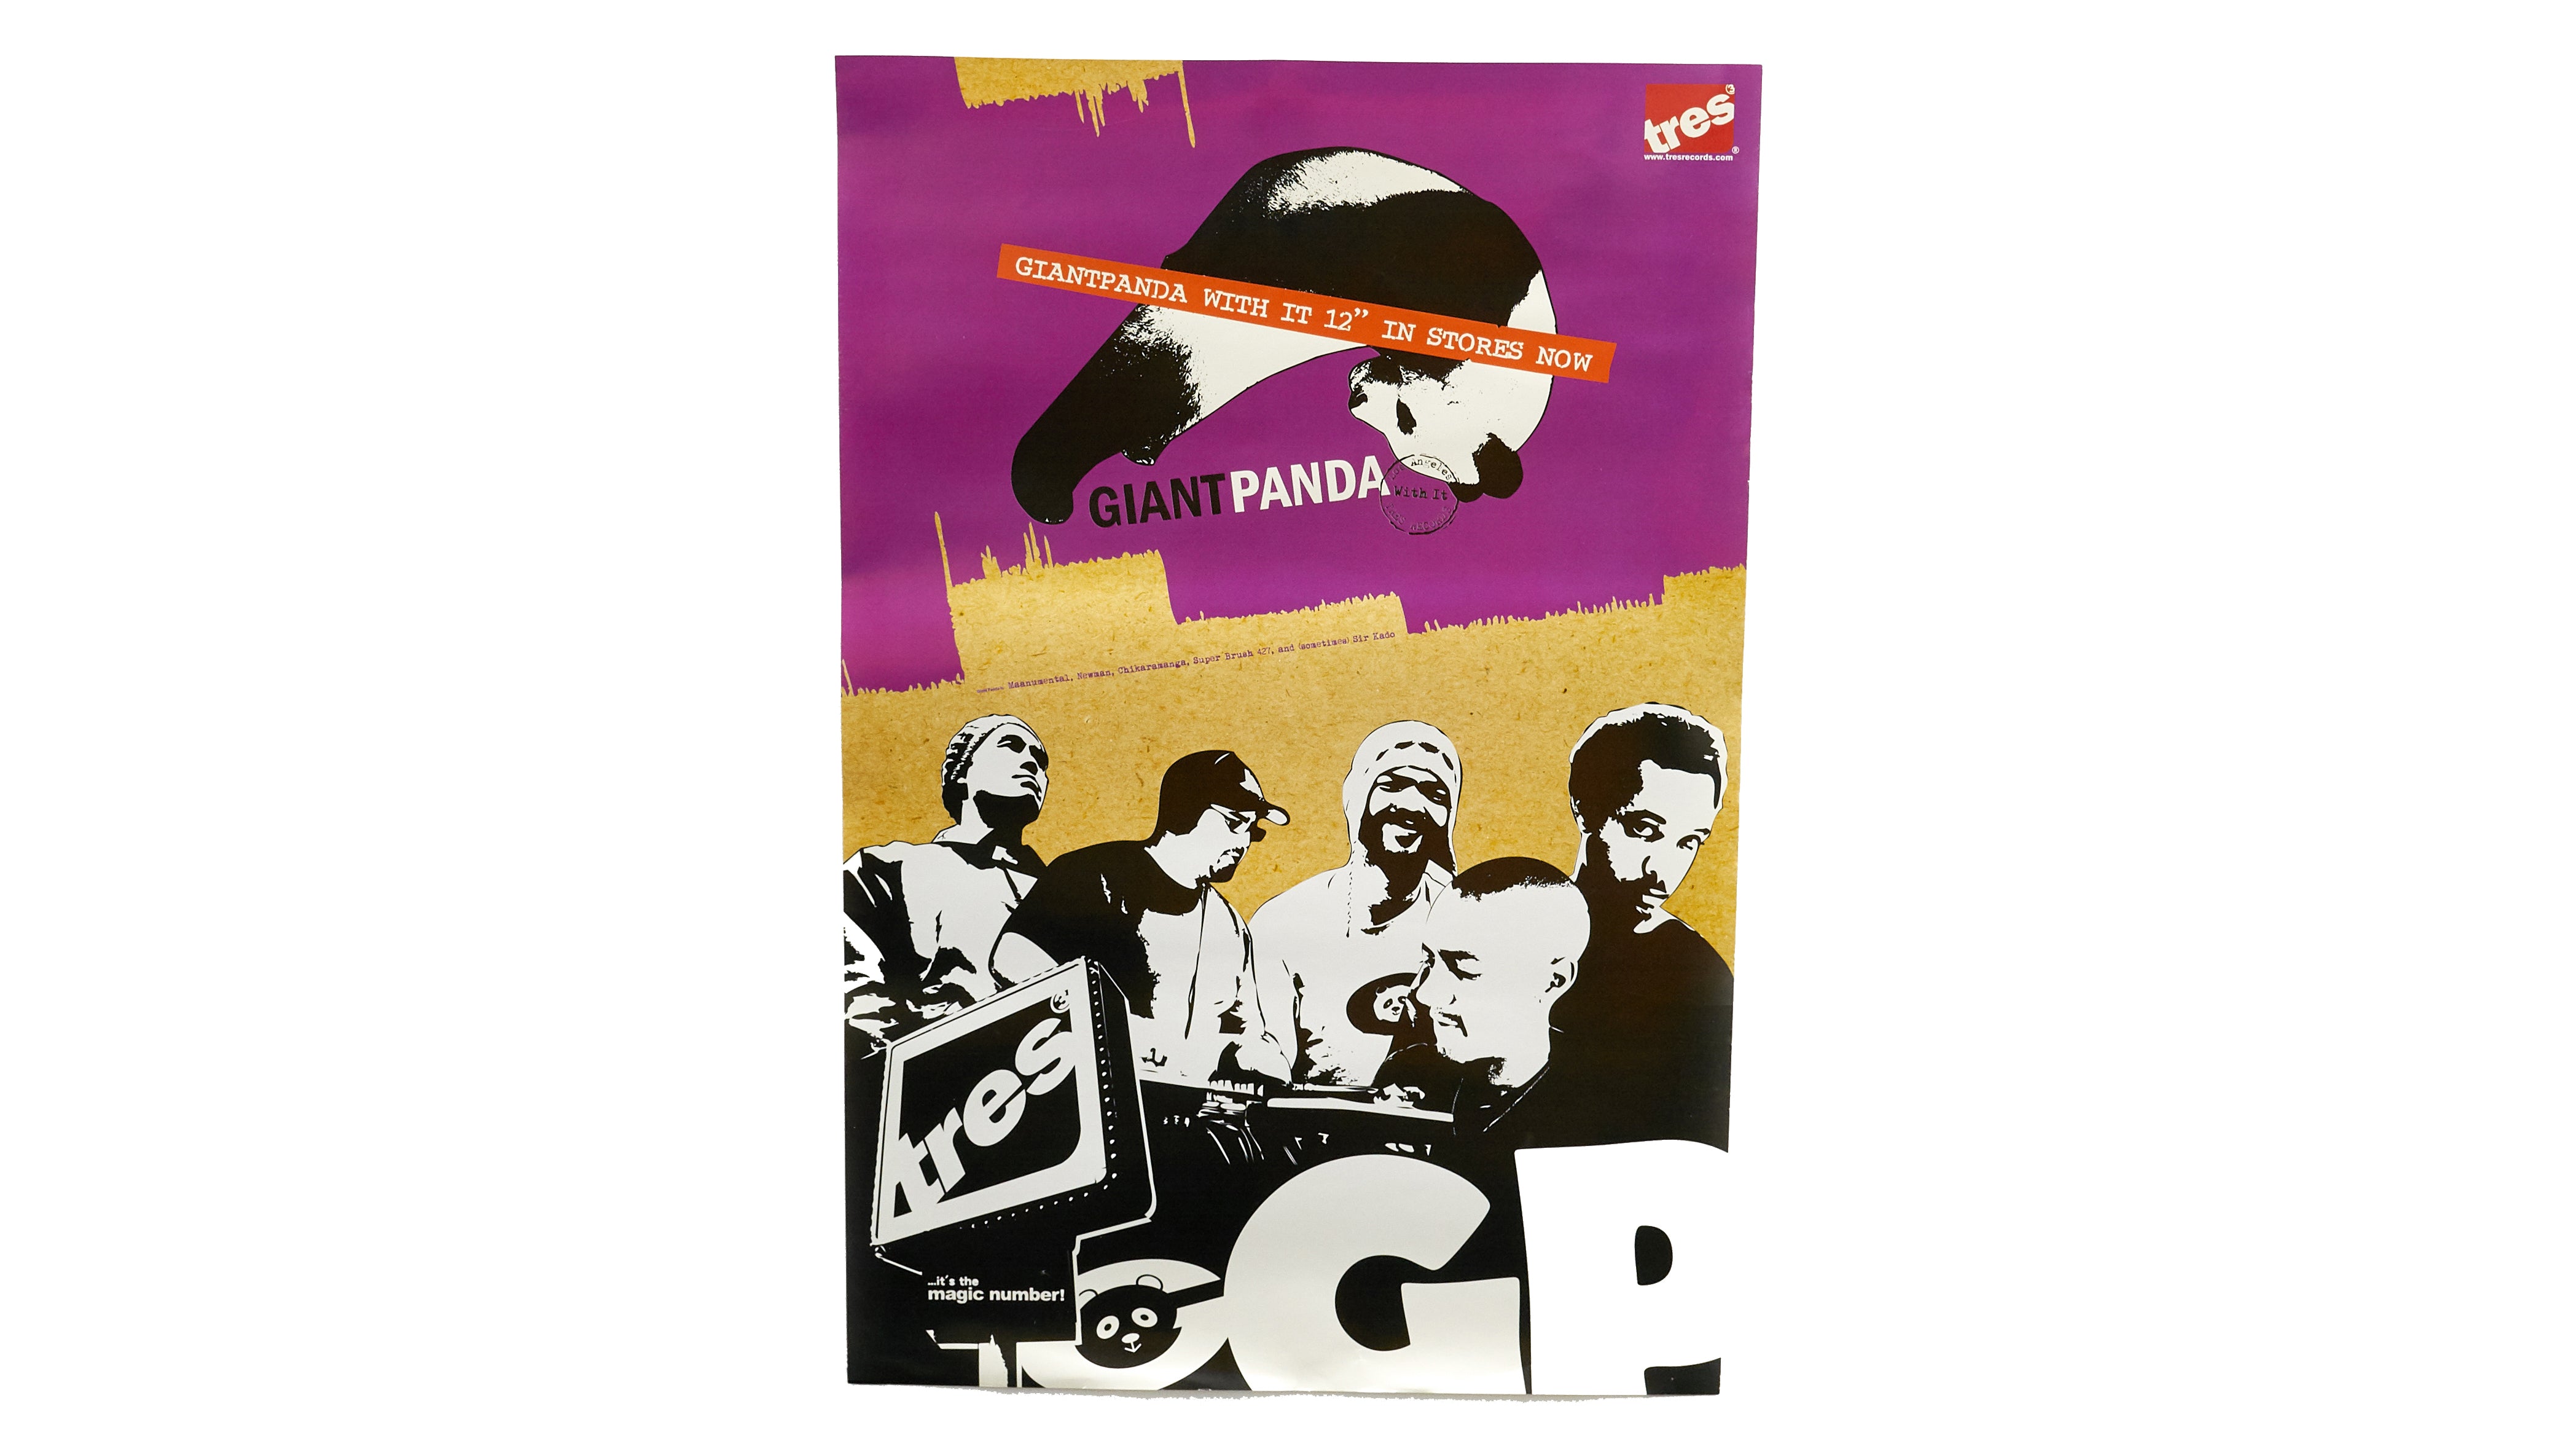 Giant Panda "With It" (Poster)